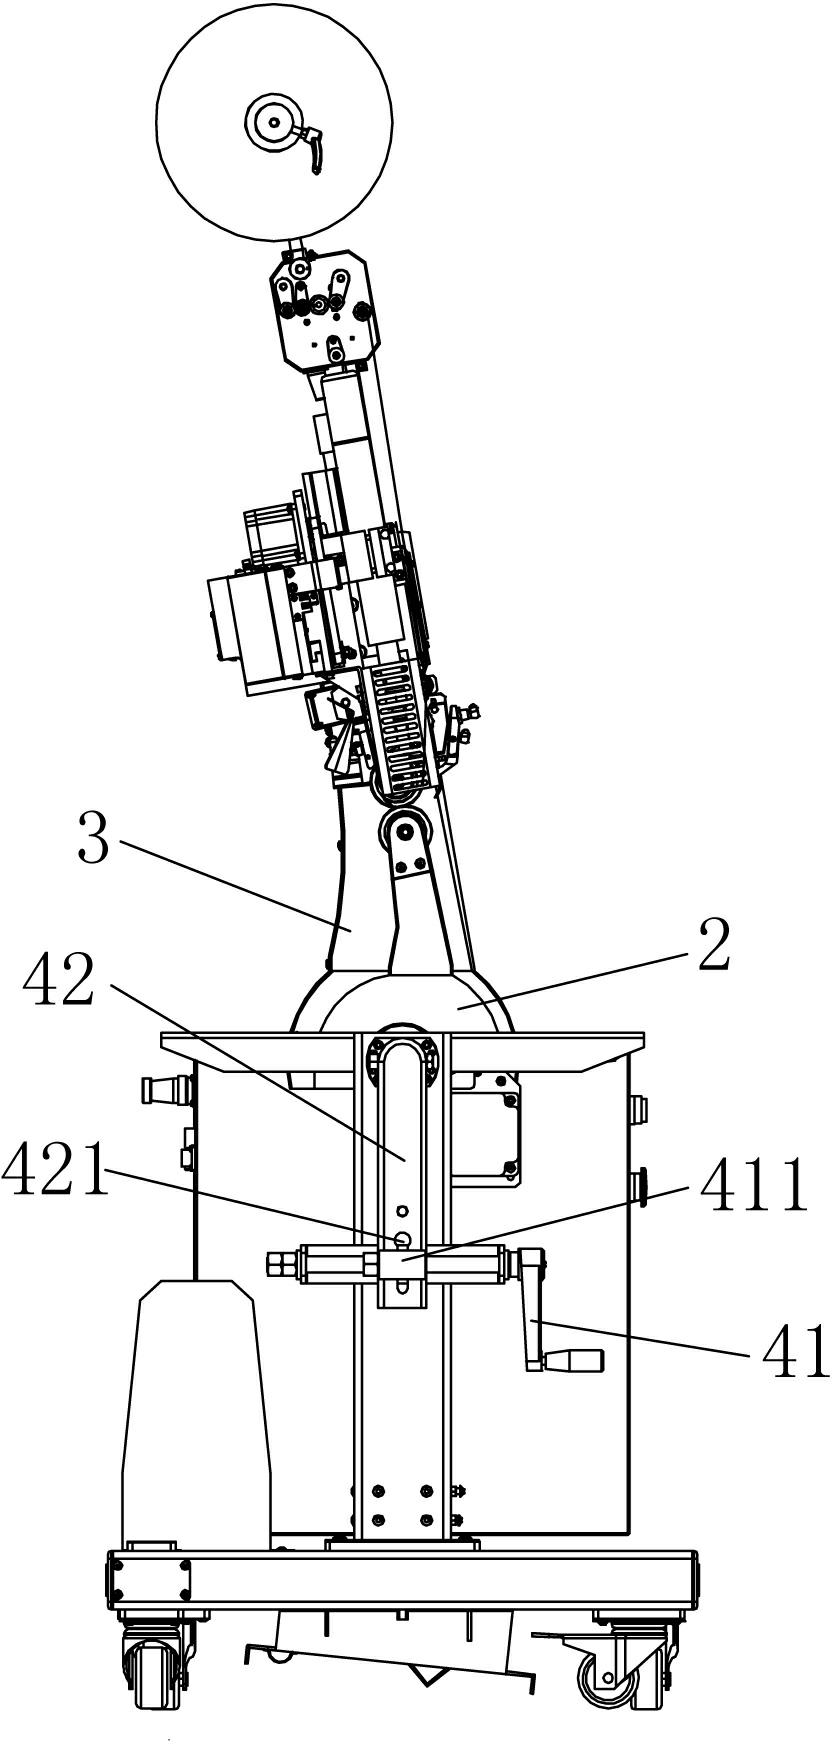 Rotating structure of bevel gauge and lower prop of hot air seam sealing machine